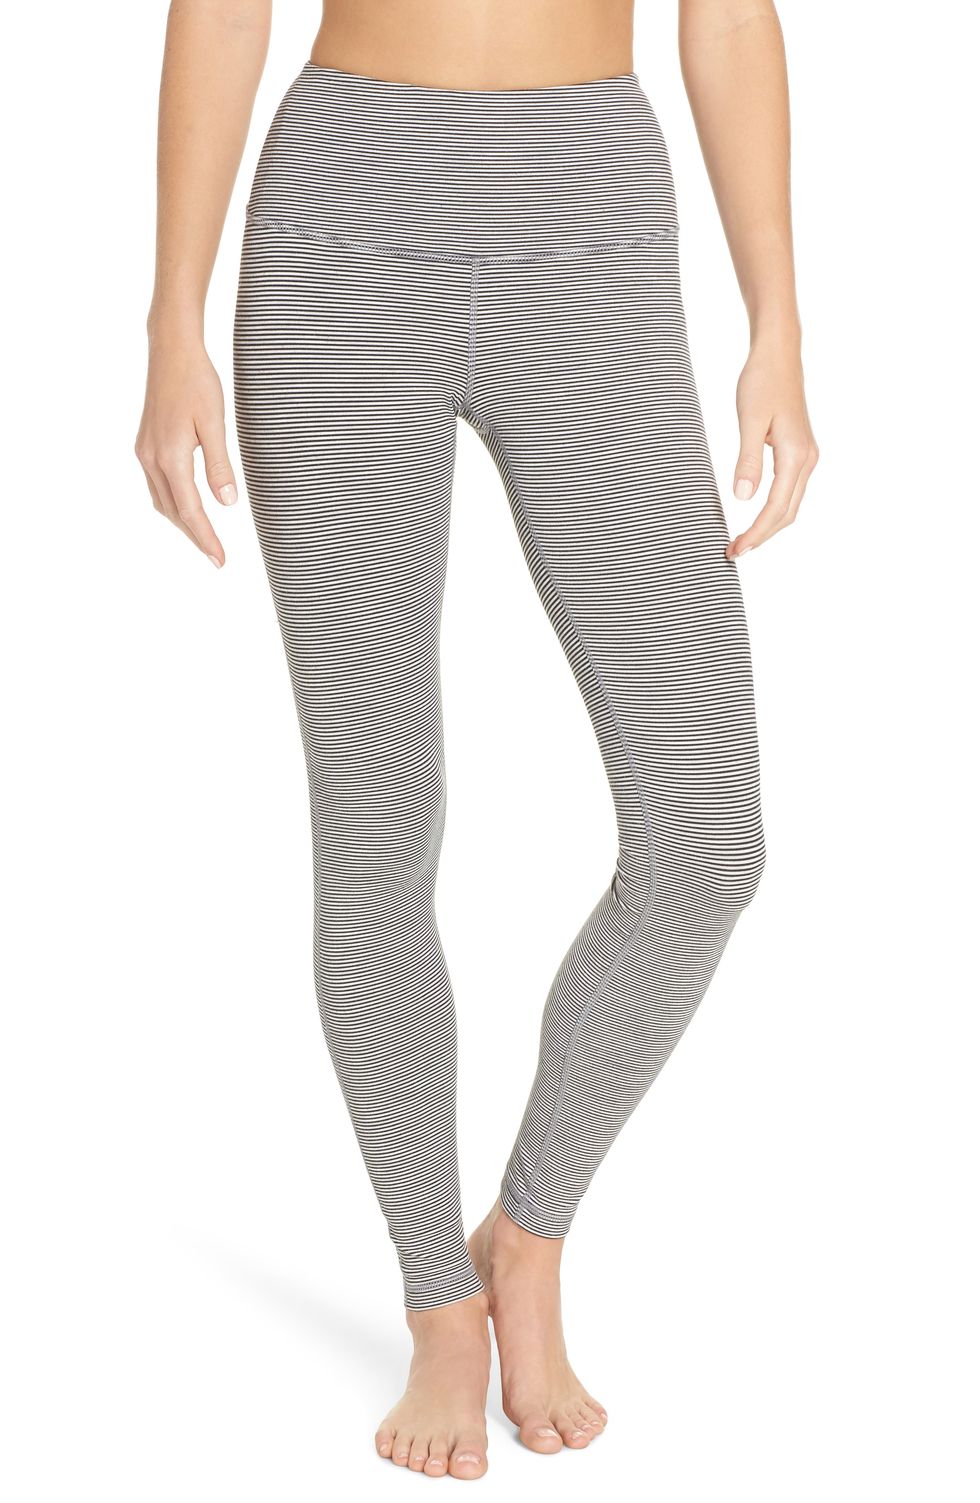 Zella's Live In High Waist Leggings Are 33% Off for Black Friday